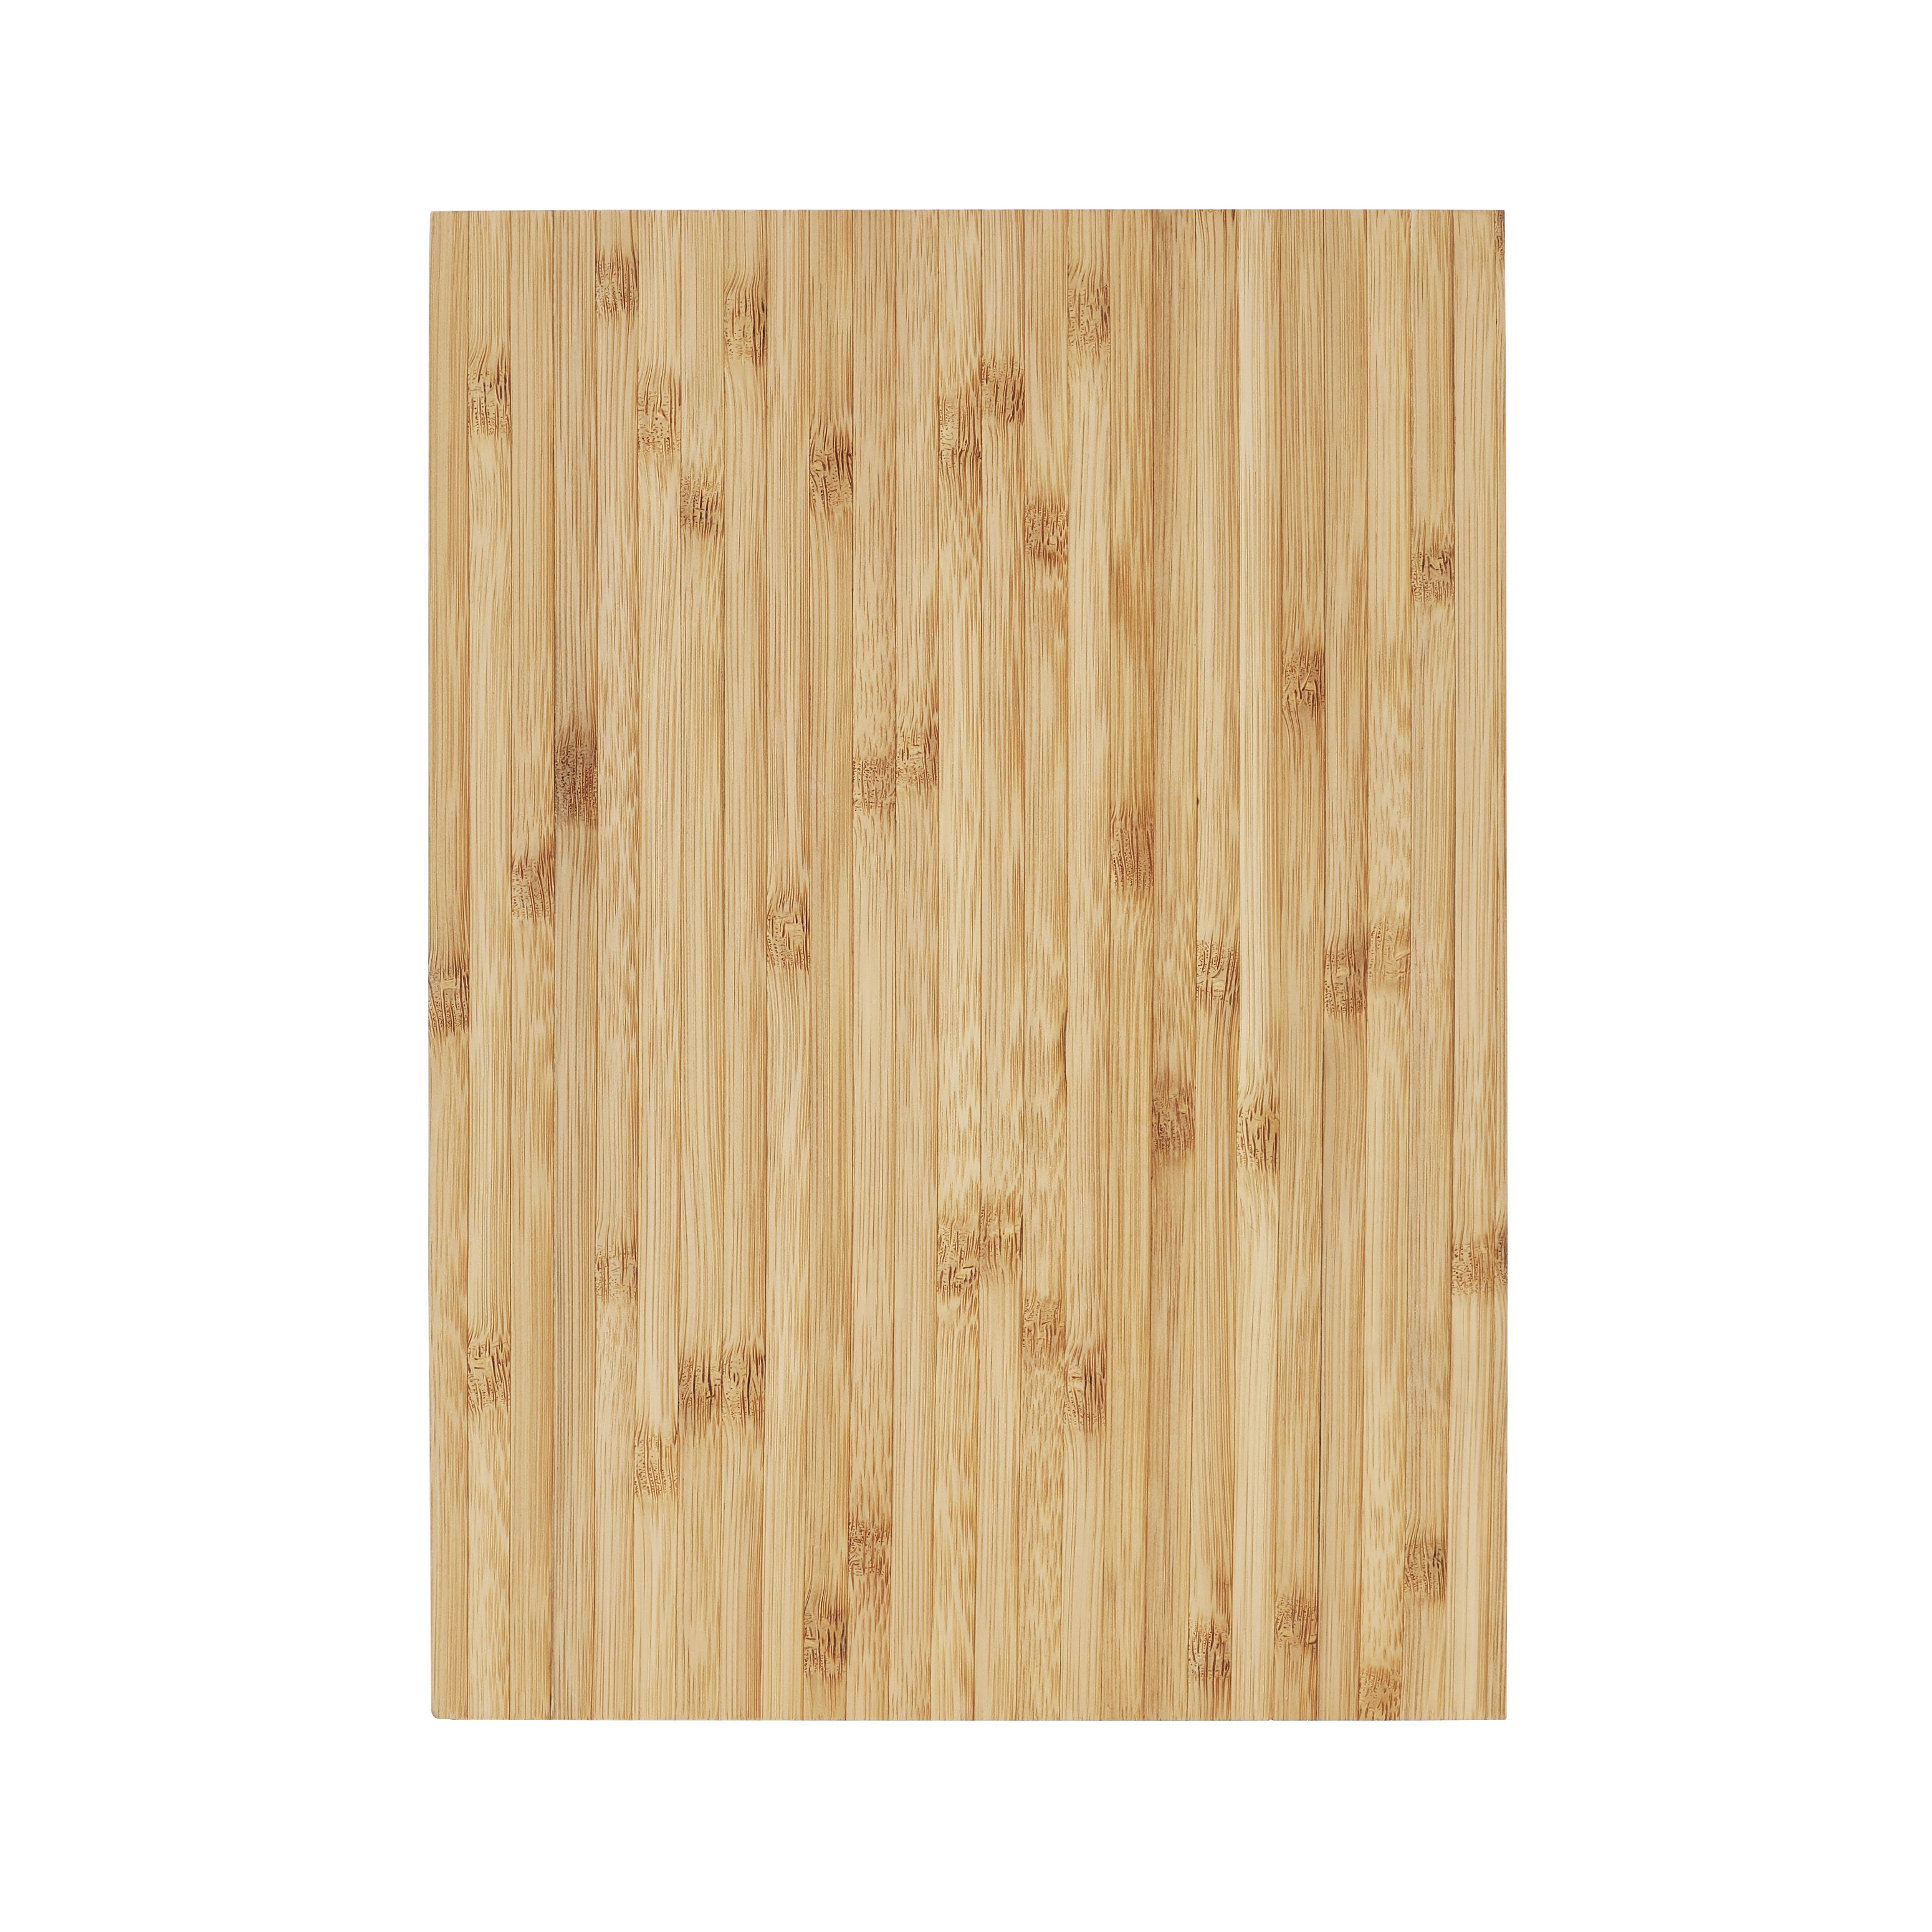 GoodHome Datil Natural Chopping board